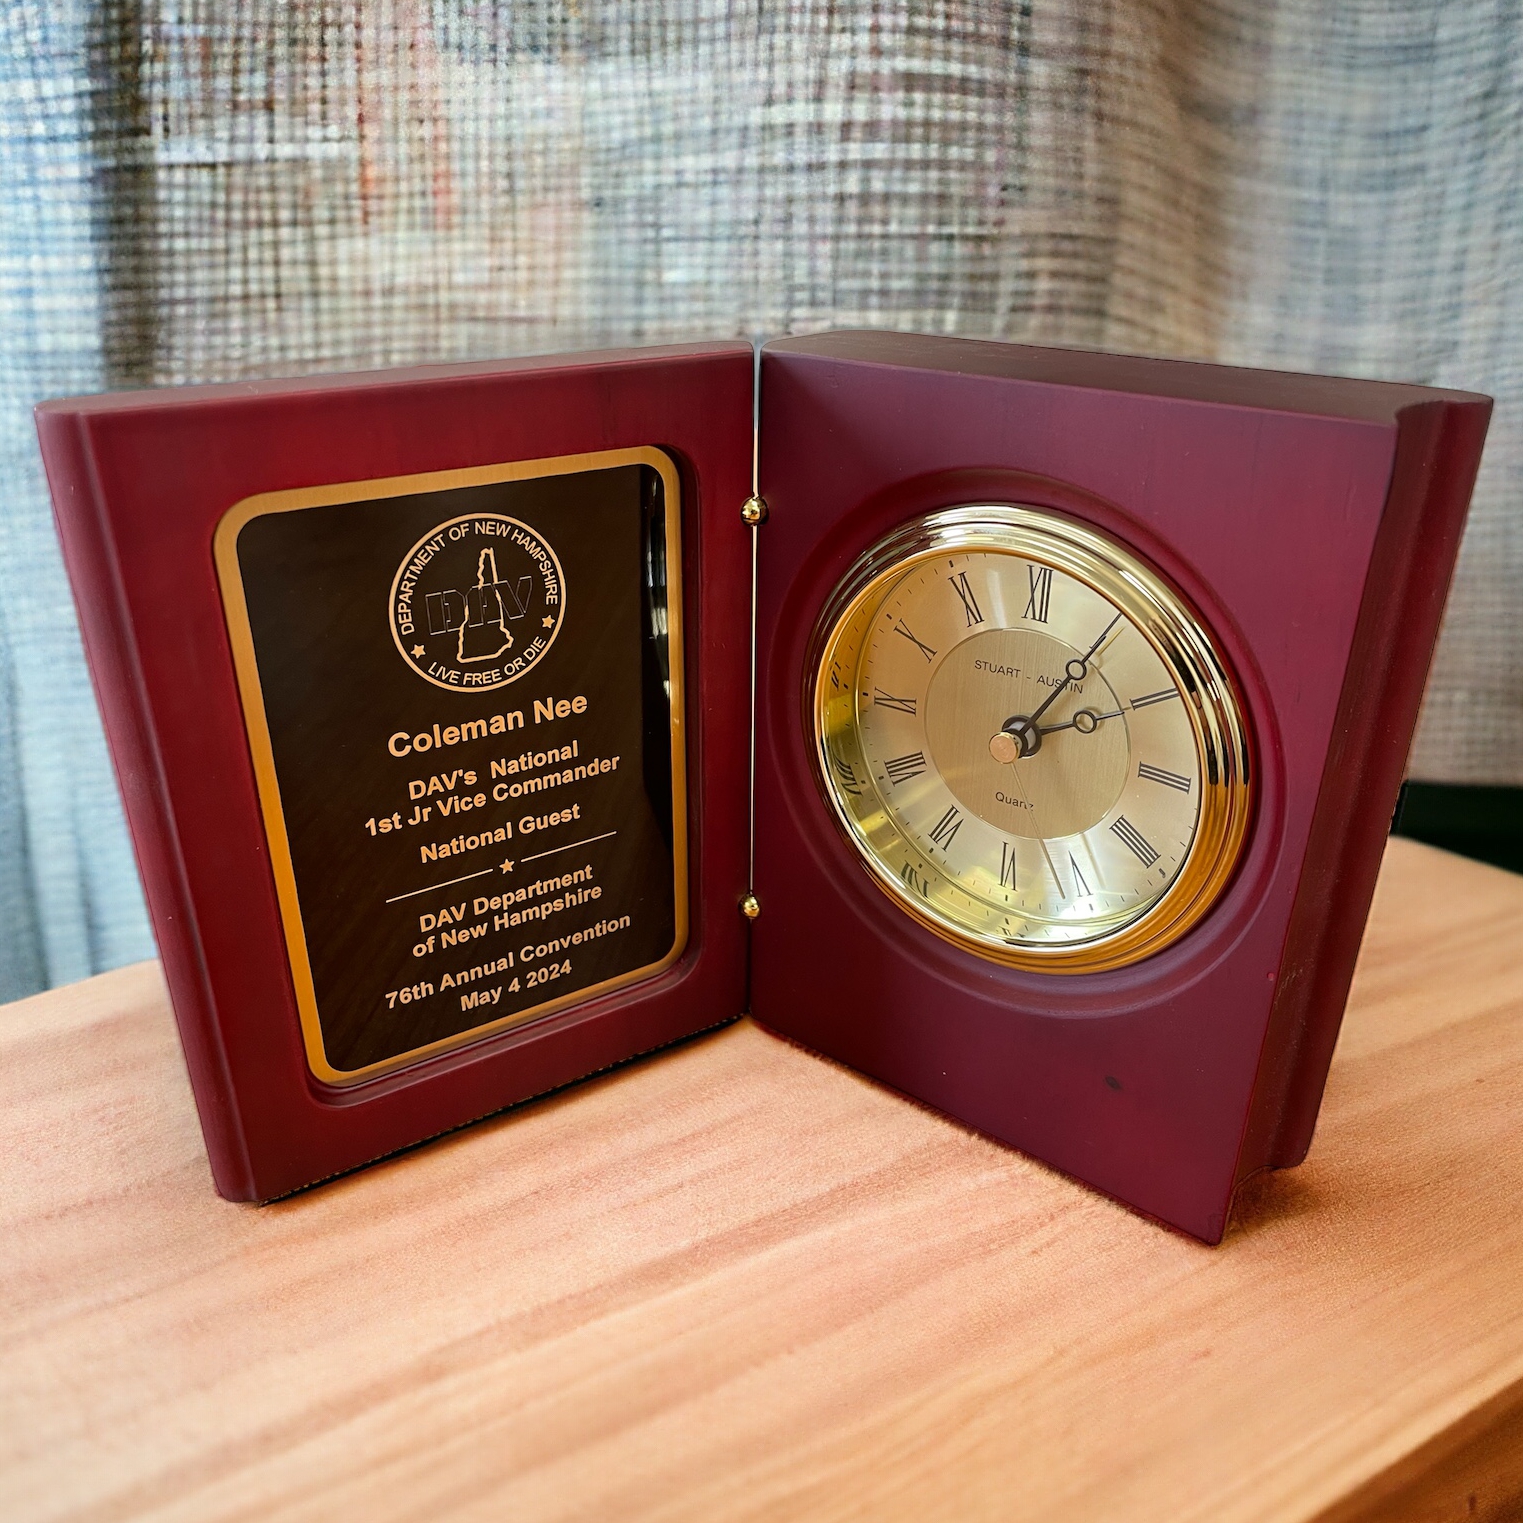 A book clock made with a hand-rubbed mahogany finish. The inside features a black & gold engraving plate on the left and a gold clock with a lifetime warranty on the right. It's sitting on a desk with curtains in the back ground.